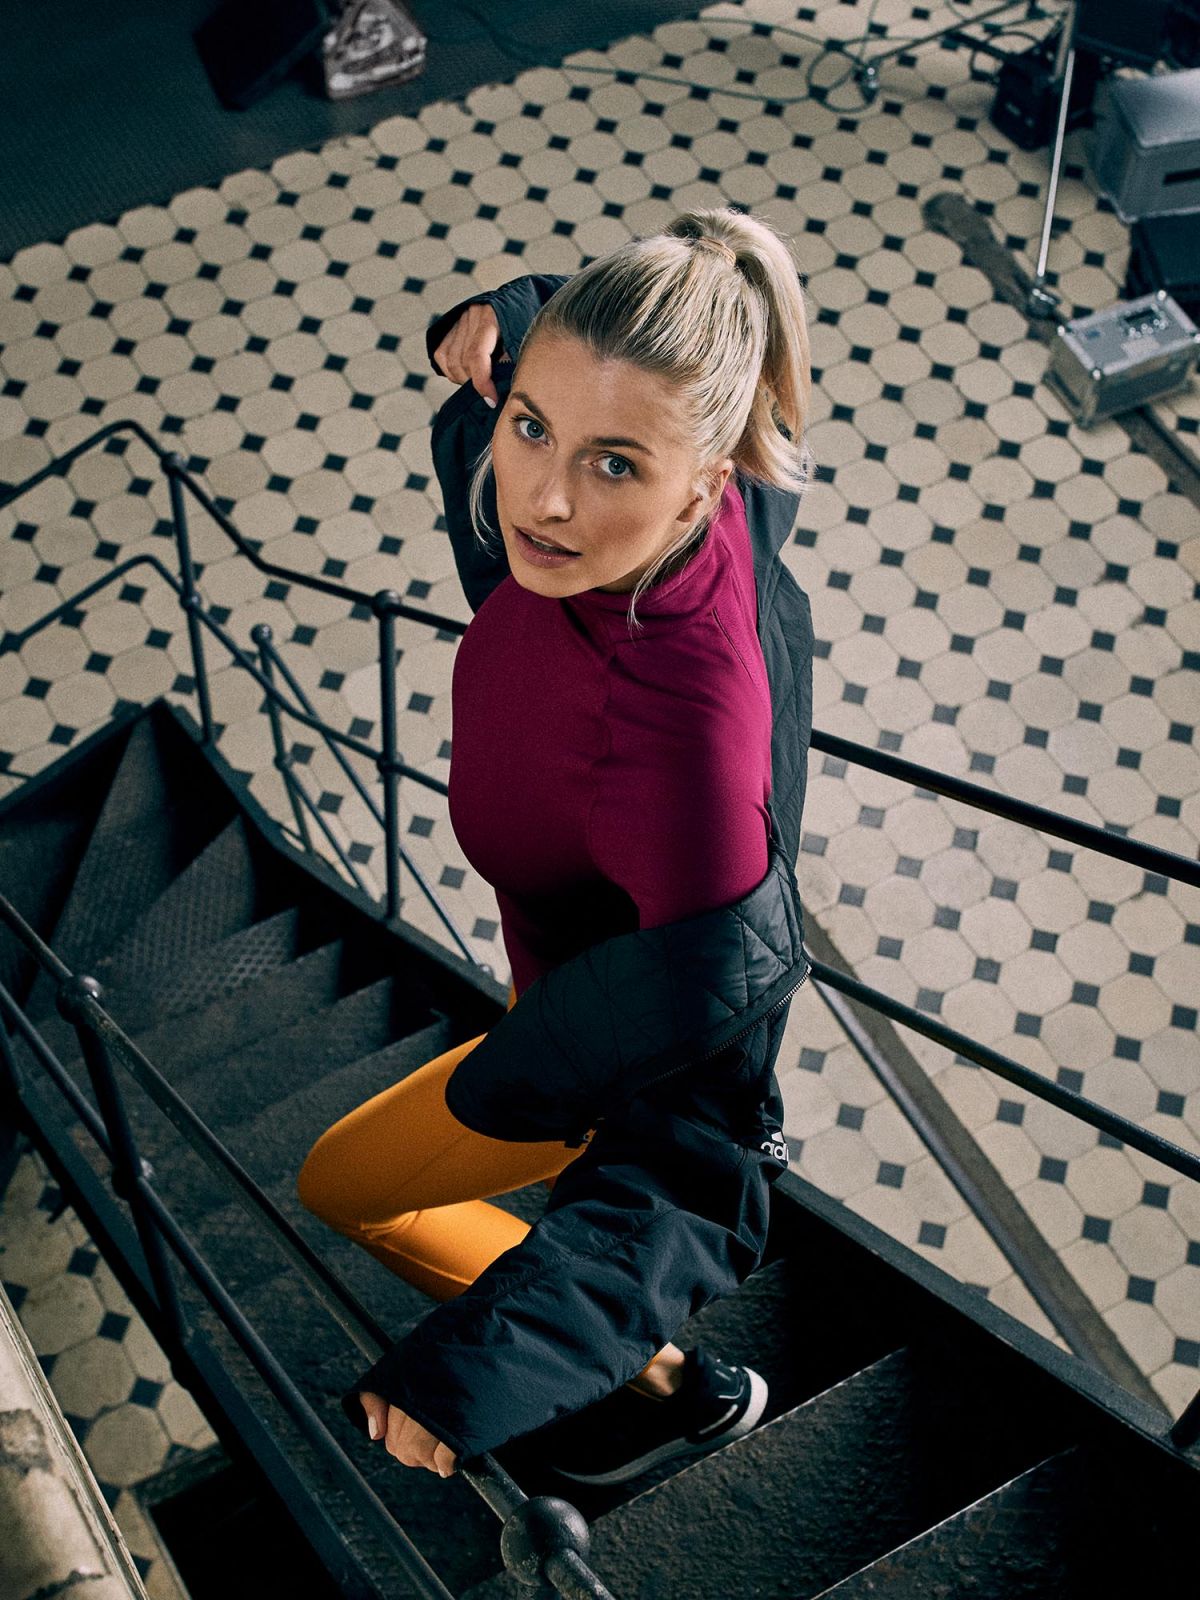 Lena Gercke Photoshoot for Adidas About You Sportwear 2020 Issue